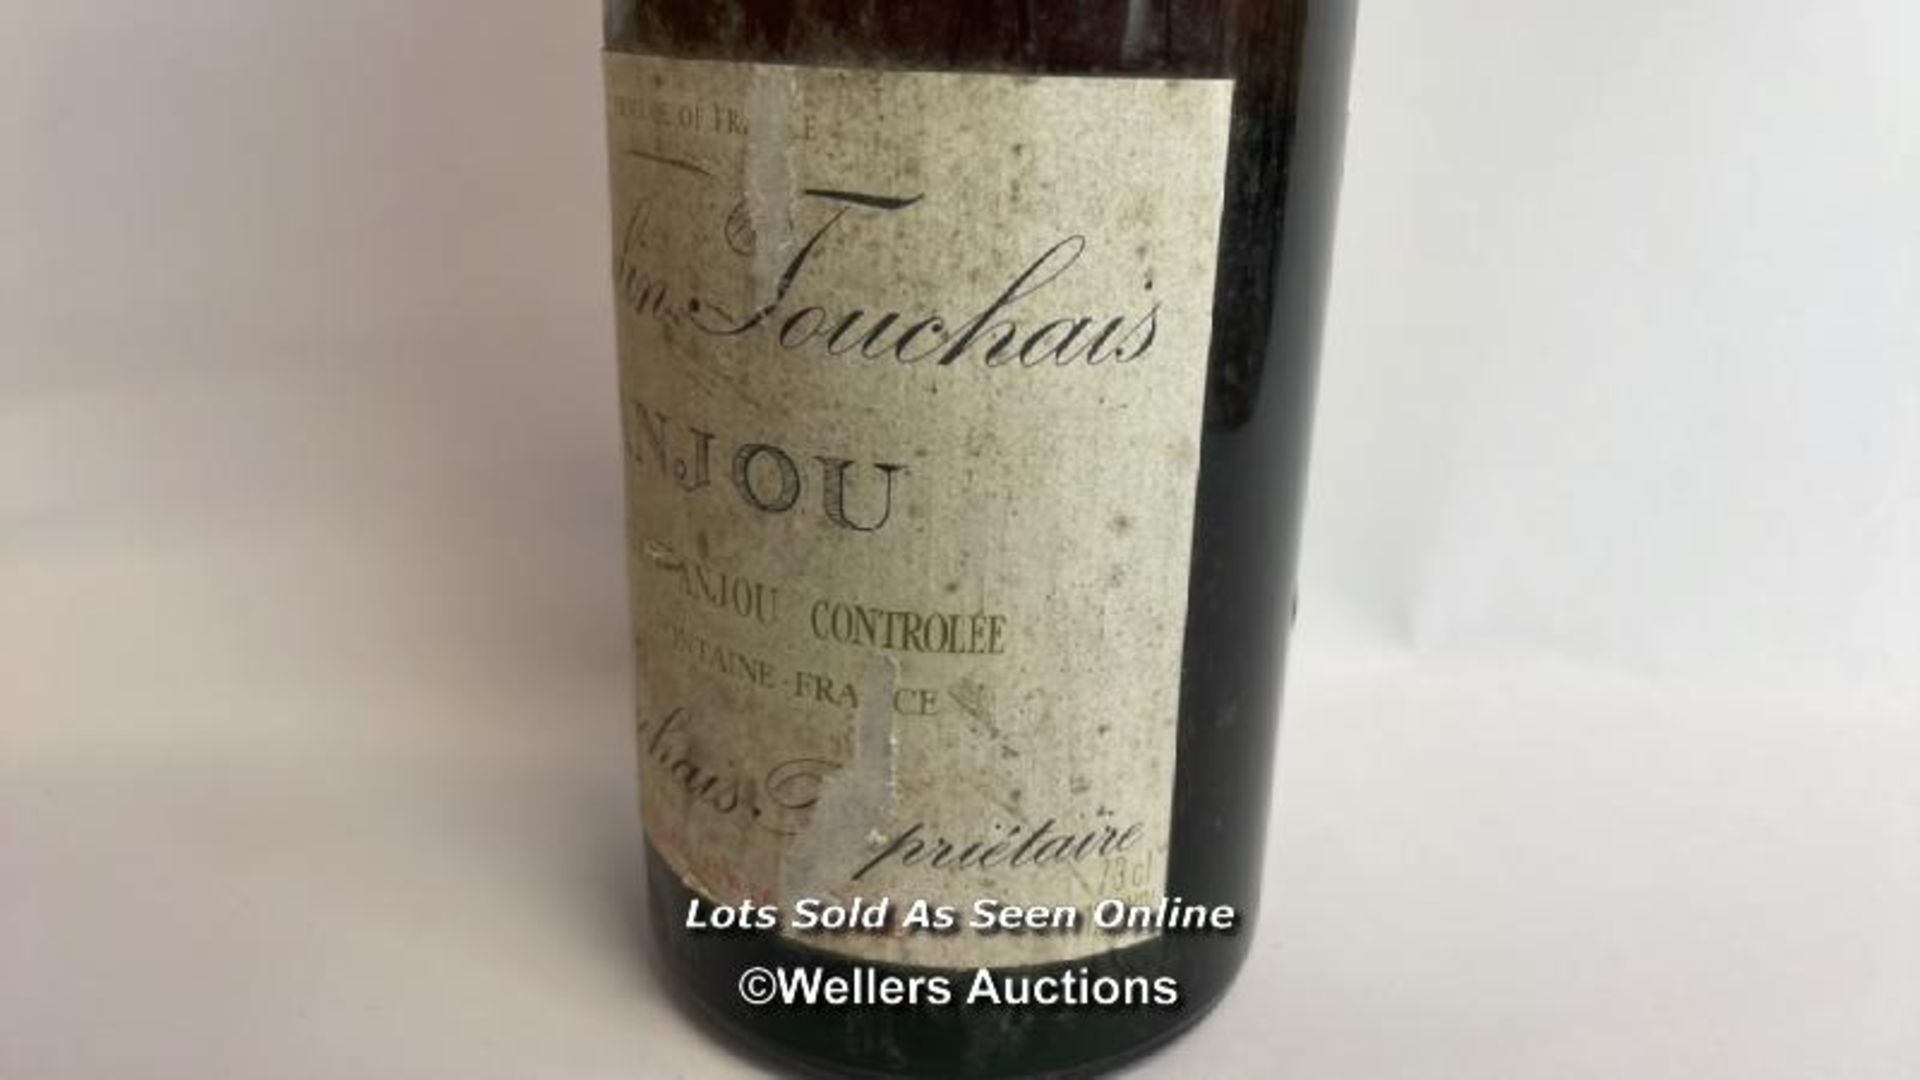 1959 Moulin Touchais Anjou L.Touchais Proprietaire, 73cl, 12% vol / Please see images for fill level - Image 7 of 14